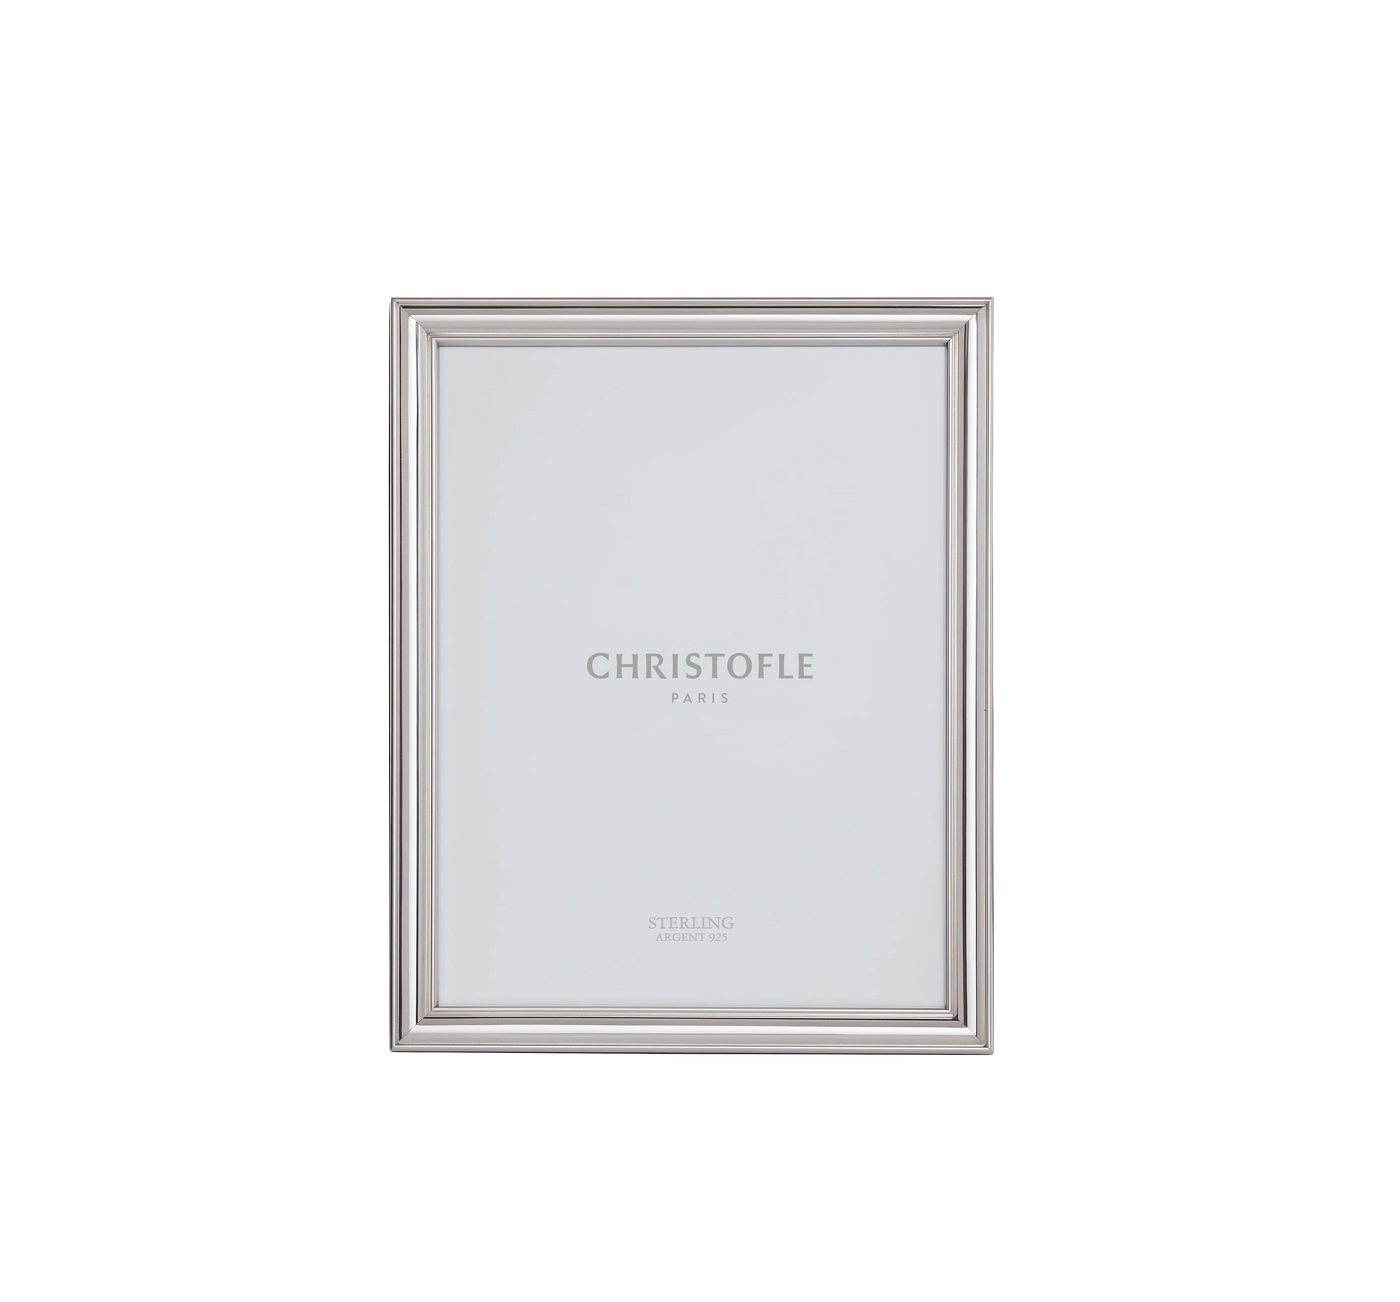 CHRISTOFLE FRAME STERLING SILVER ALBI (Available in 4 Sizes)